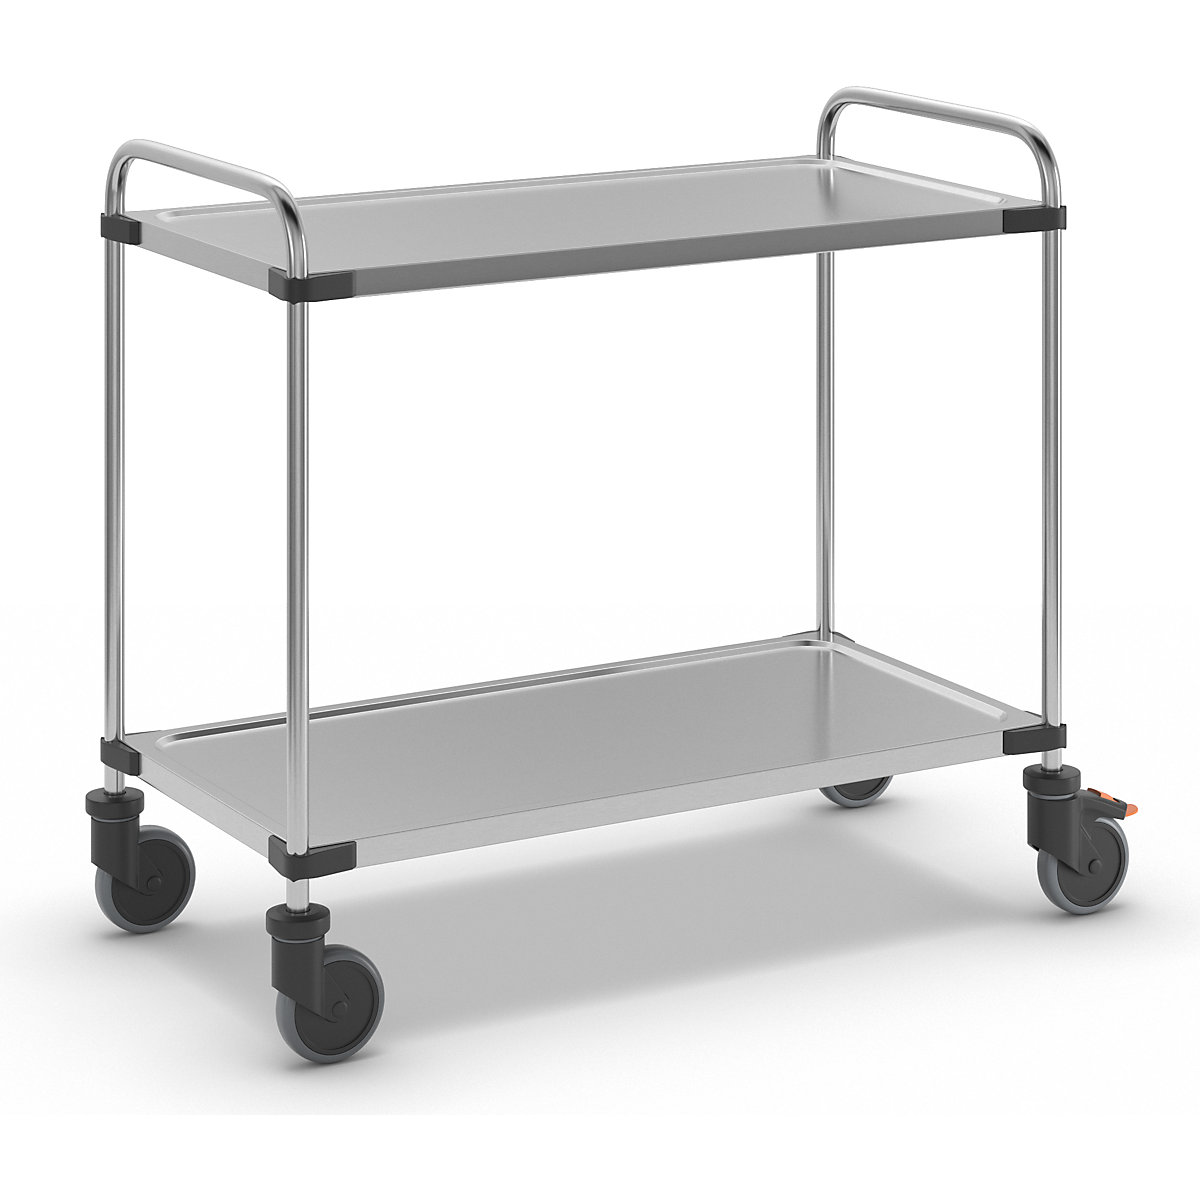 Stainless steel table trolley